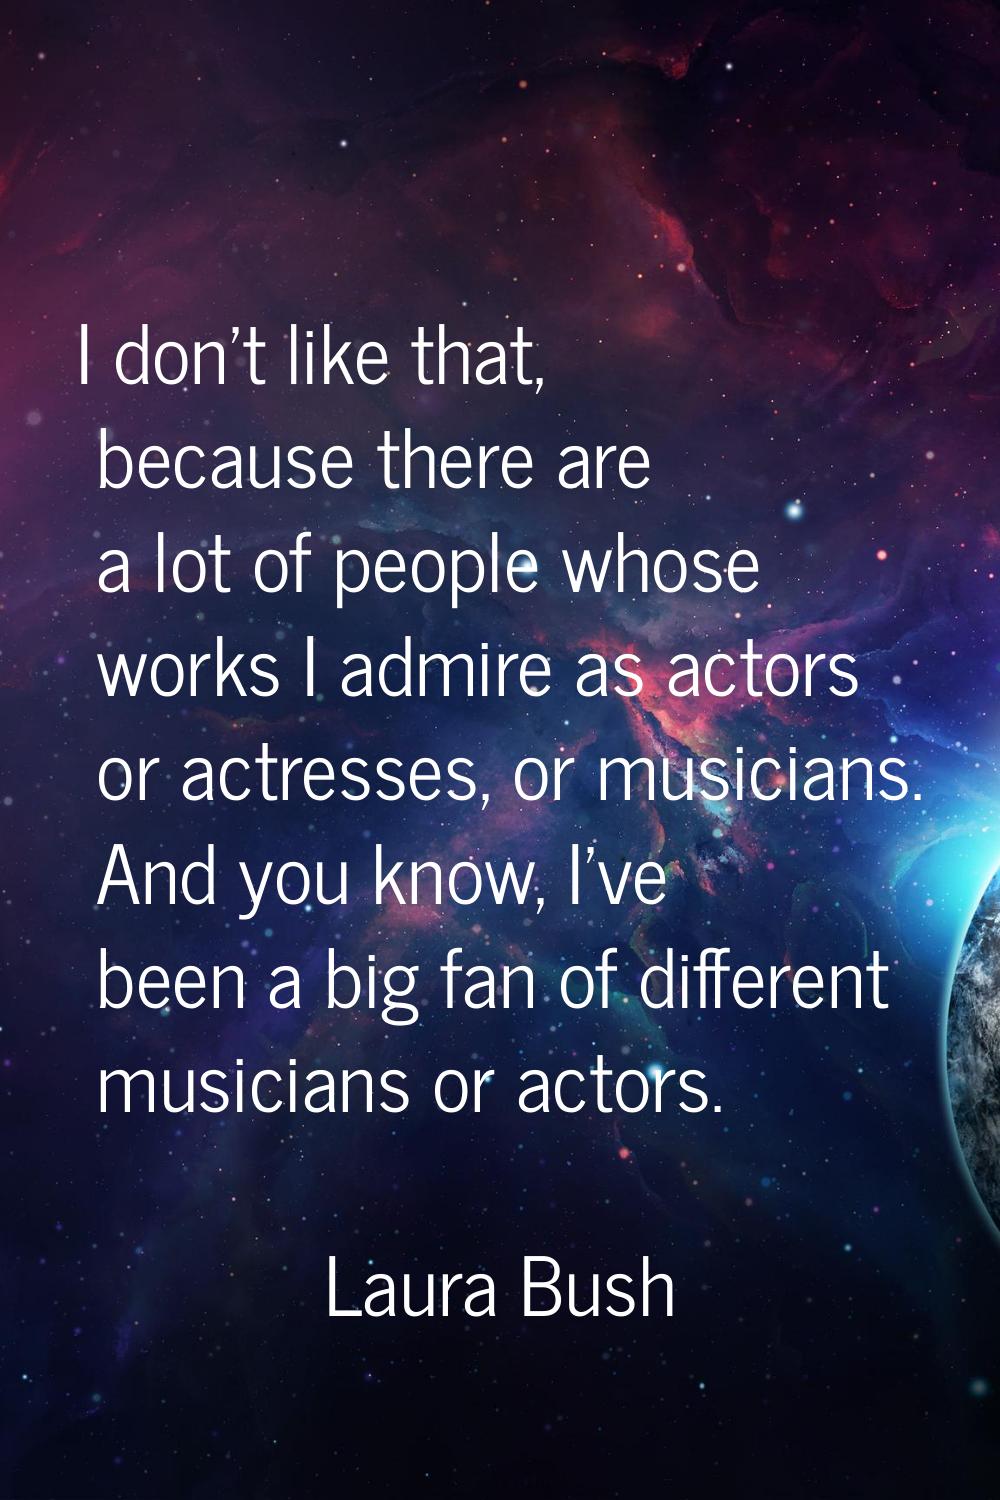 I don't like that, because there are a lot of people whose works I admire as actors or actresses, o